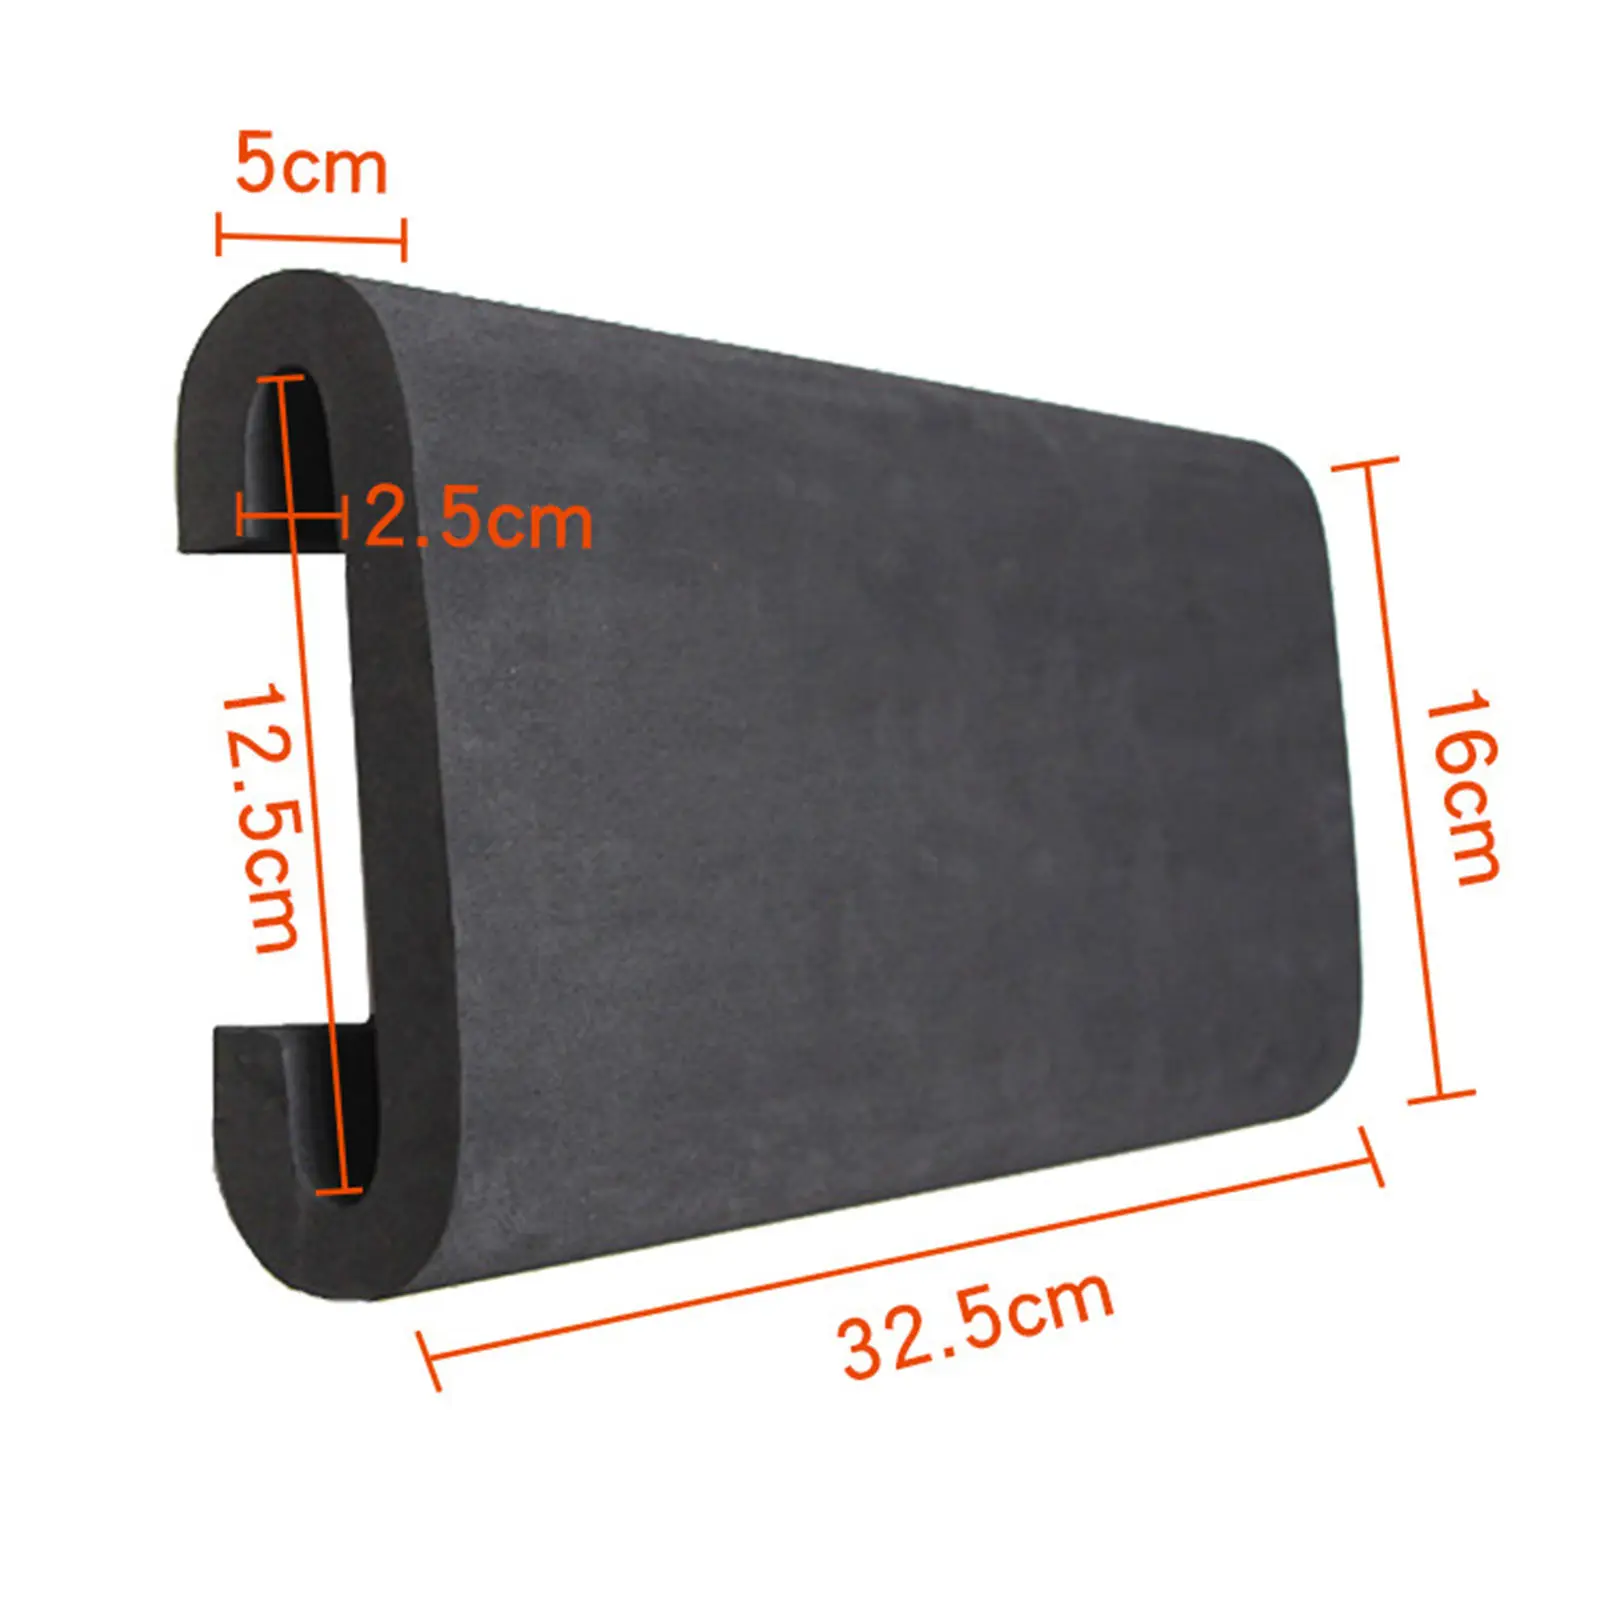 Boat Pad Shock Absorption Breathability Protect Seat Non-Slip for Training